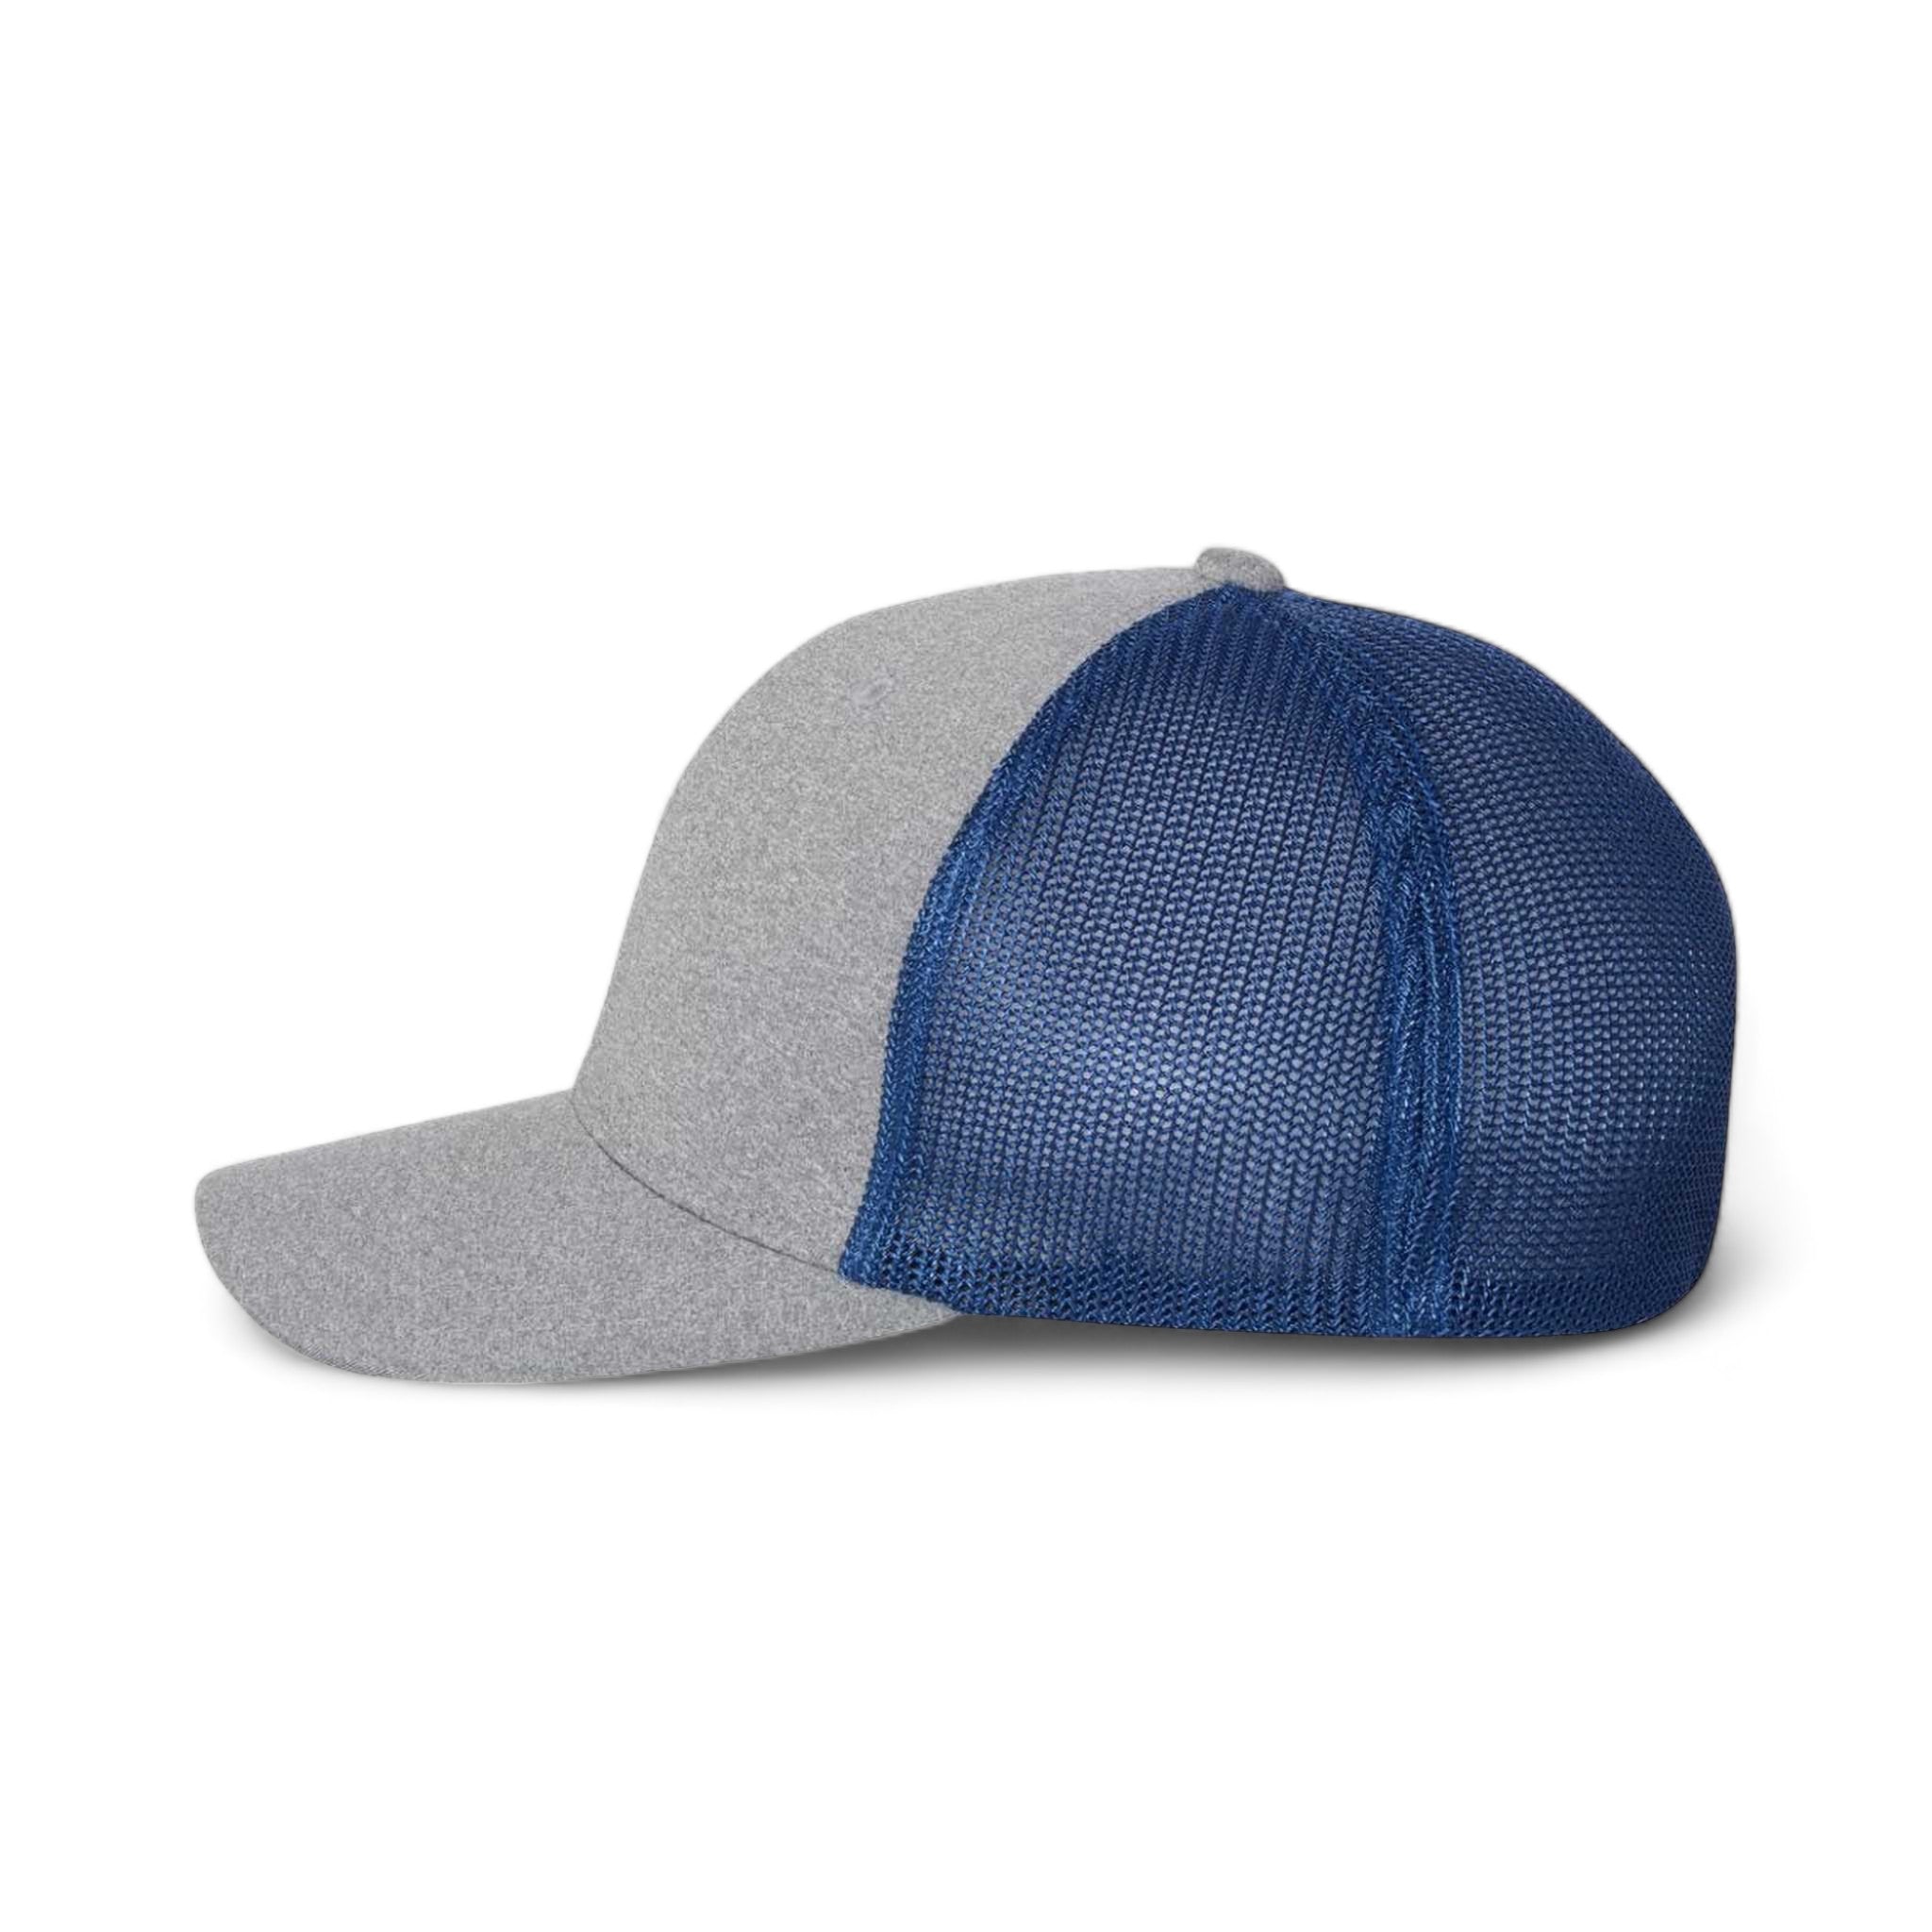 Side view of Flexfit 6311 custom hat in heather grey and royal